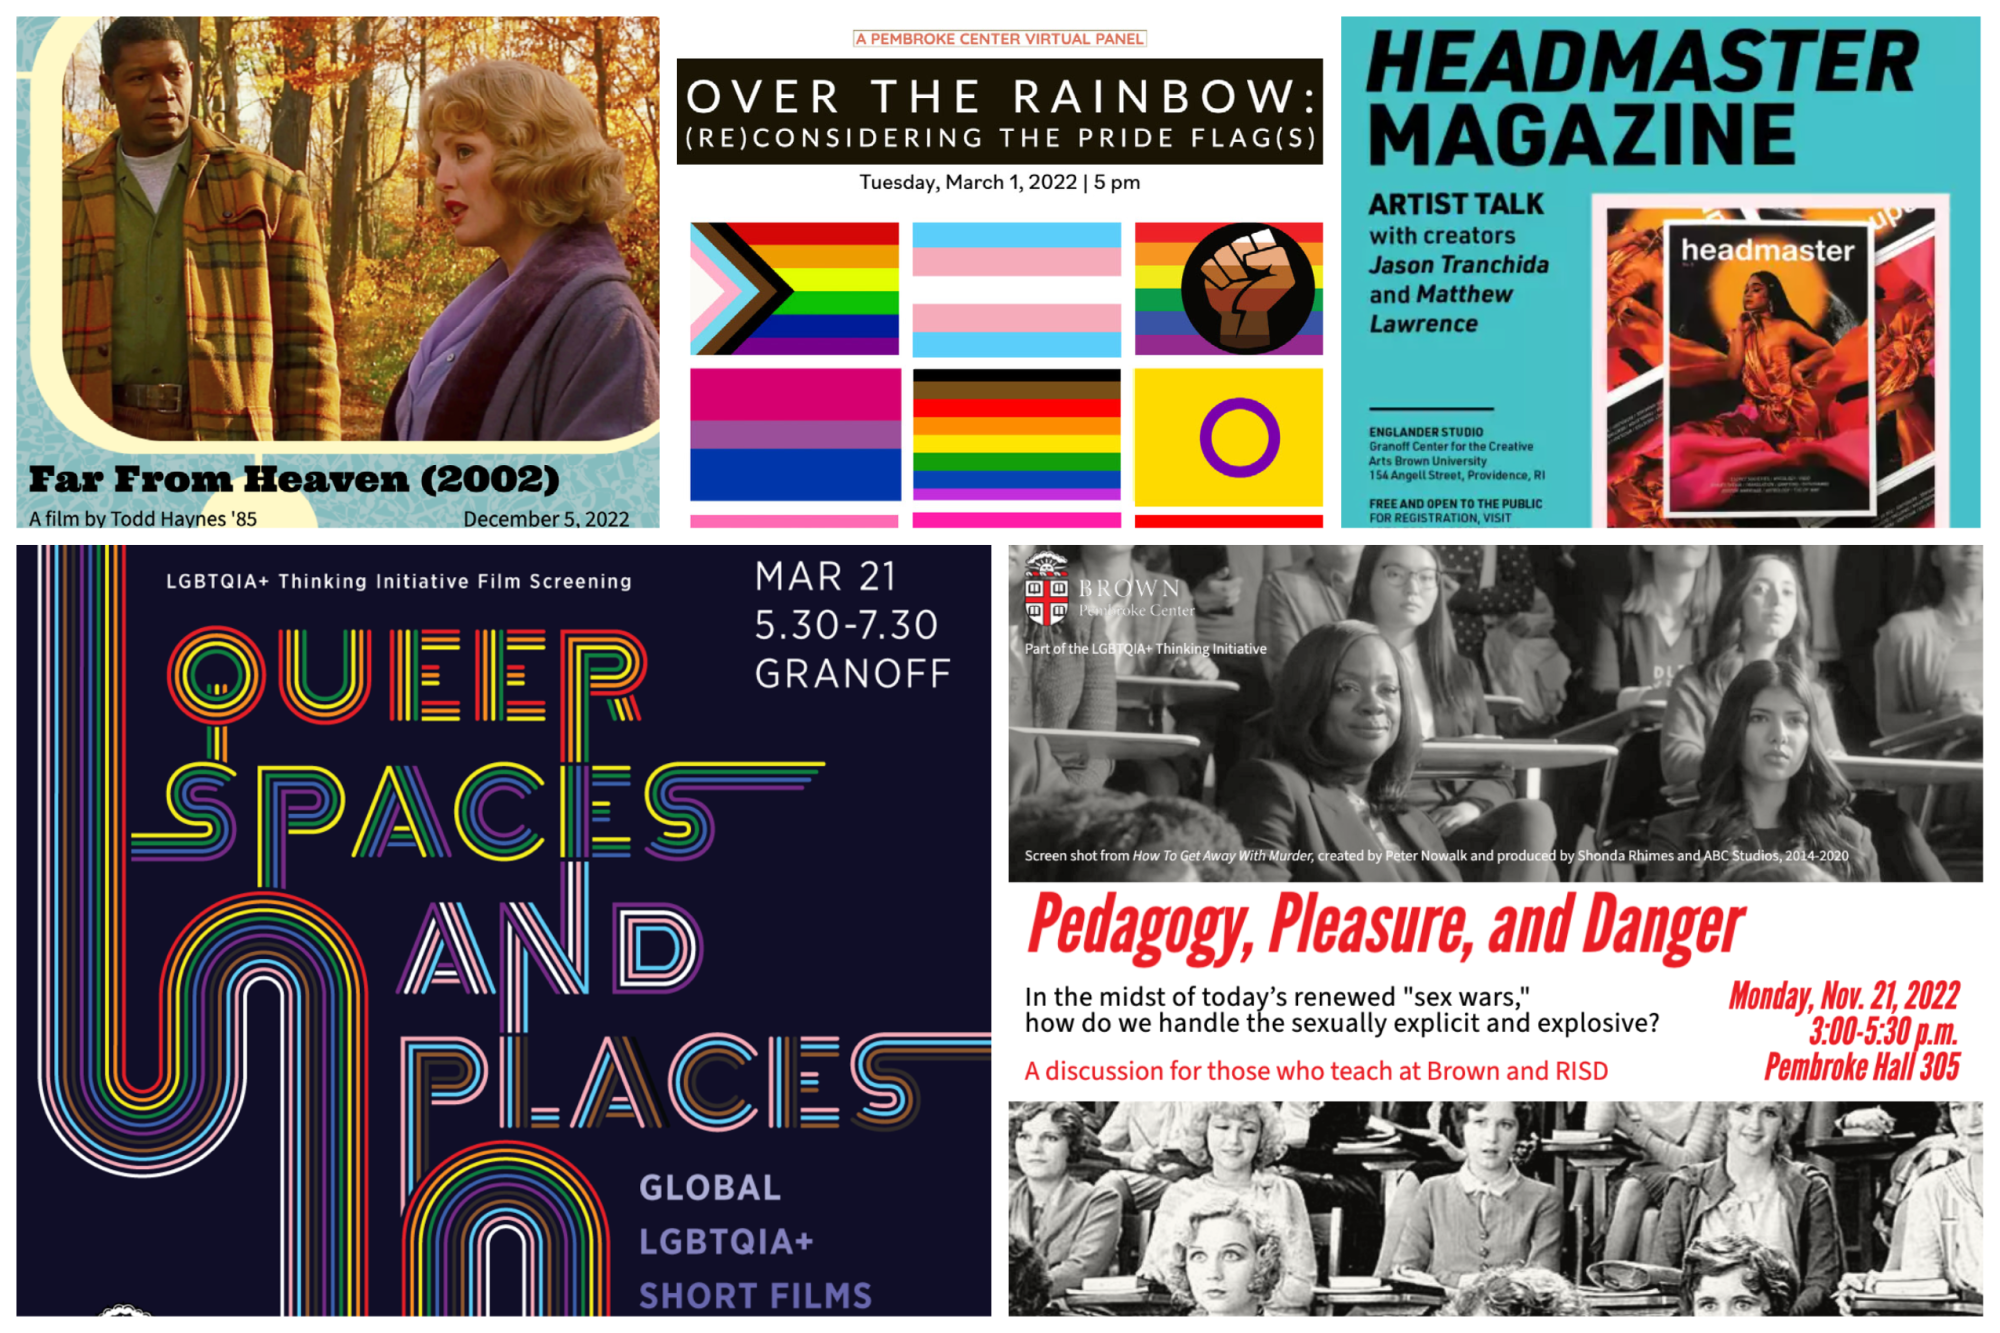 Collage of event flyers from five LGBTQIA+ Thinking Events: Far From Heaven screening; Over the Rainbow Pride Flag Discussion; Headmaster magazine artist talk; Queer Spaces and Places Global LGBTQIA Film Event; and Pedagogy, Pleasure, and Danger workshop.